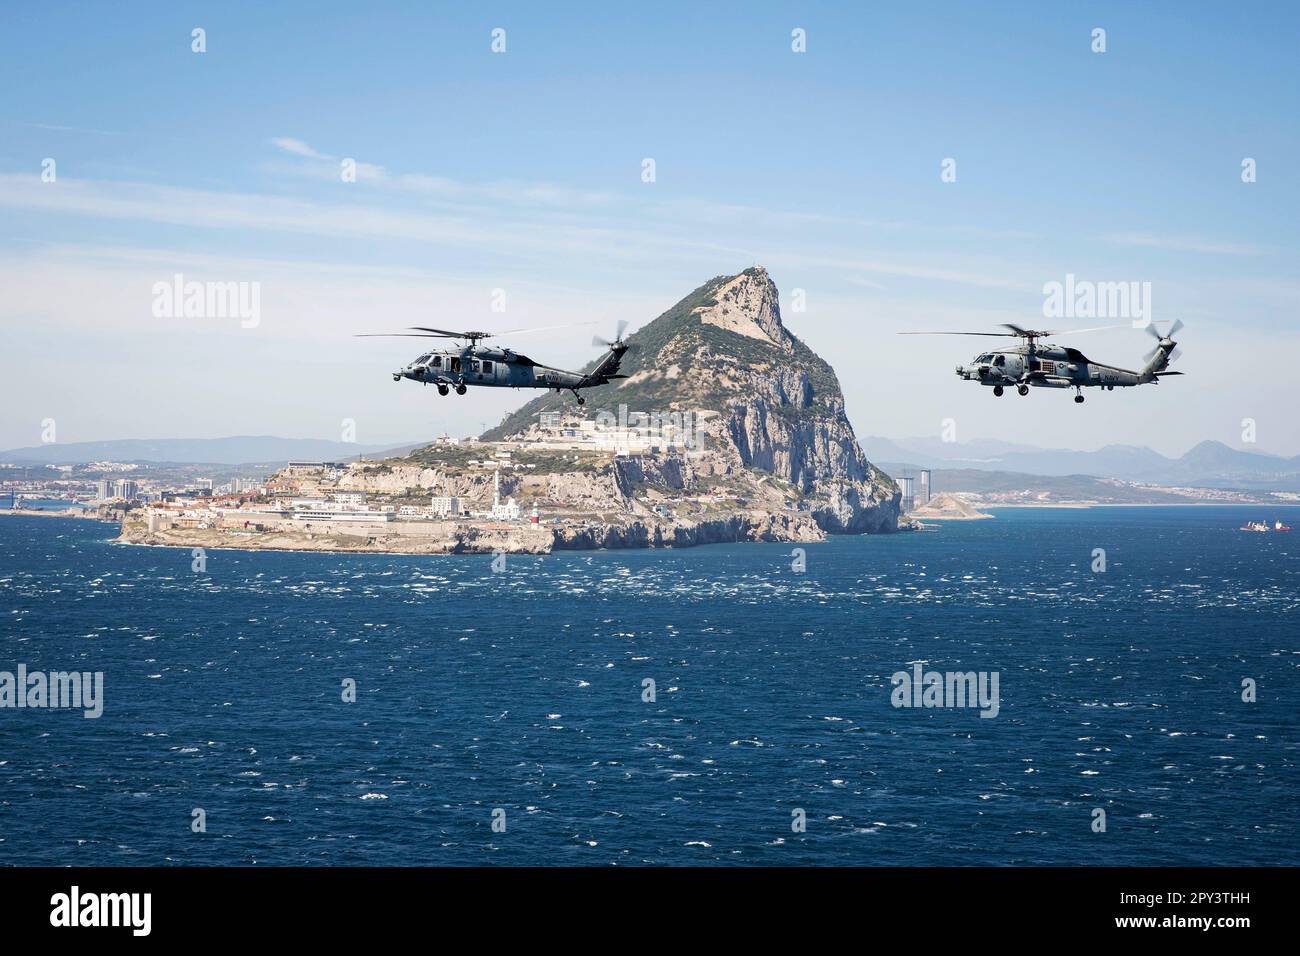 Strait Of Gibraltar. 12th Apr, 2023. An MH-60S Nighthawk helicopter, attached to Helicopter Sea Combat Squadron (HSC) 5, and an MH-60R Sea Hawk helicopter, attached to Helicopter Maritime Strike Squadron (HSM) 46, fly in formation while transiting the Strait of Gibraltar, April 12, 2023. Carrier Air Wing (CVW) 7 is the offensive air and strike component of Carrier Strike Group (CSG) 10 and the George H.W. Bush CSG. The squadrons of CVW-7 are Strike Fighter Squadron (VFA) 143, VFA-103, VFA-86, VFA-136, Carrier Airborne Early Warning Squadron (VAW) 121, Electronic Attack Squadron (VAQ) 140, HS Stock Photo